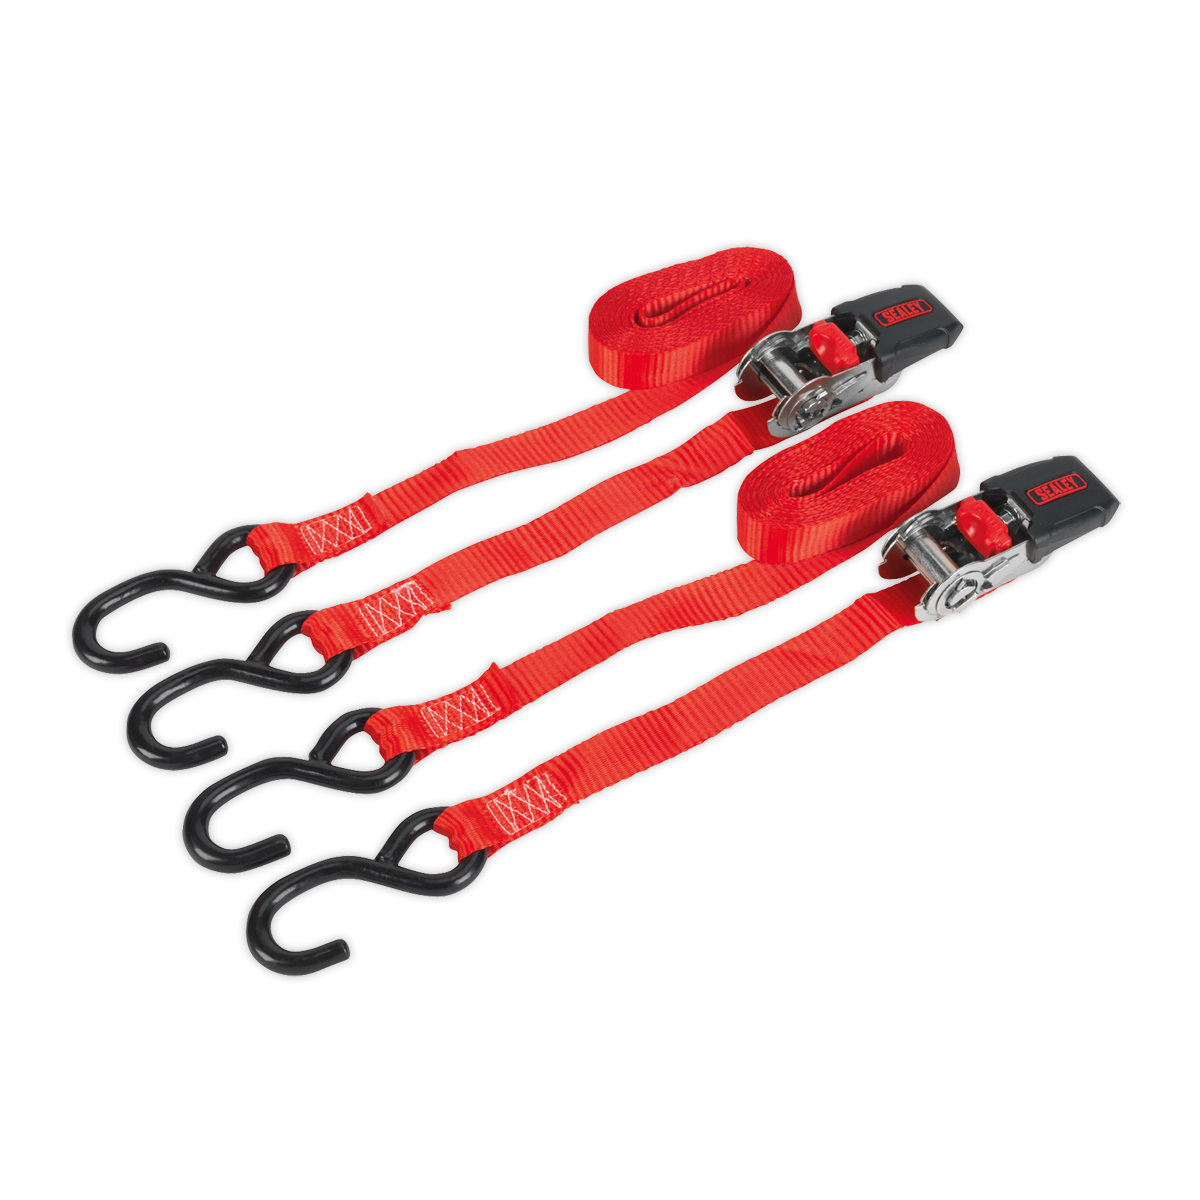 Ratchet Straps 25mm x 4m Polyester Webbing with S-Hooks 800kg Breaking Strength - Pair - TD284SD - Farming Parts